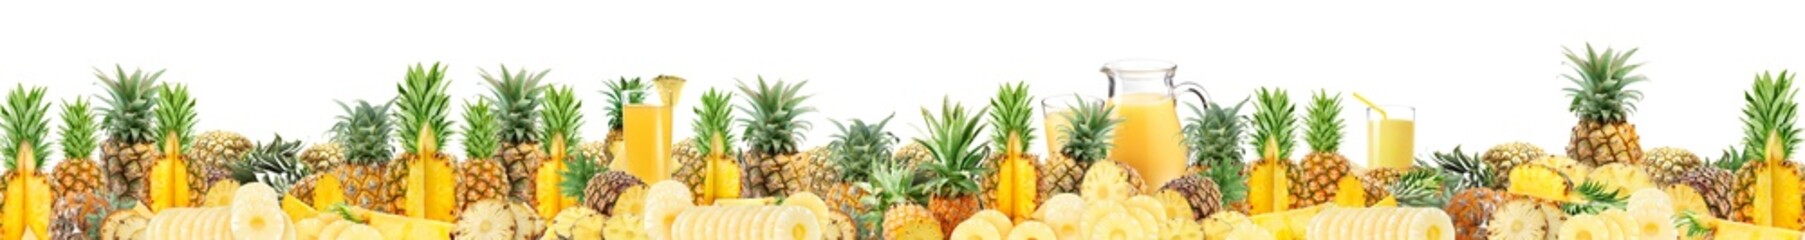 Pineapples whole and half on a white background